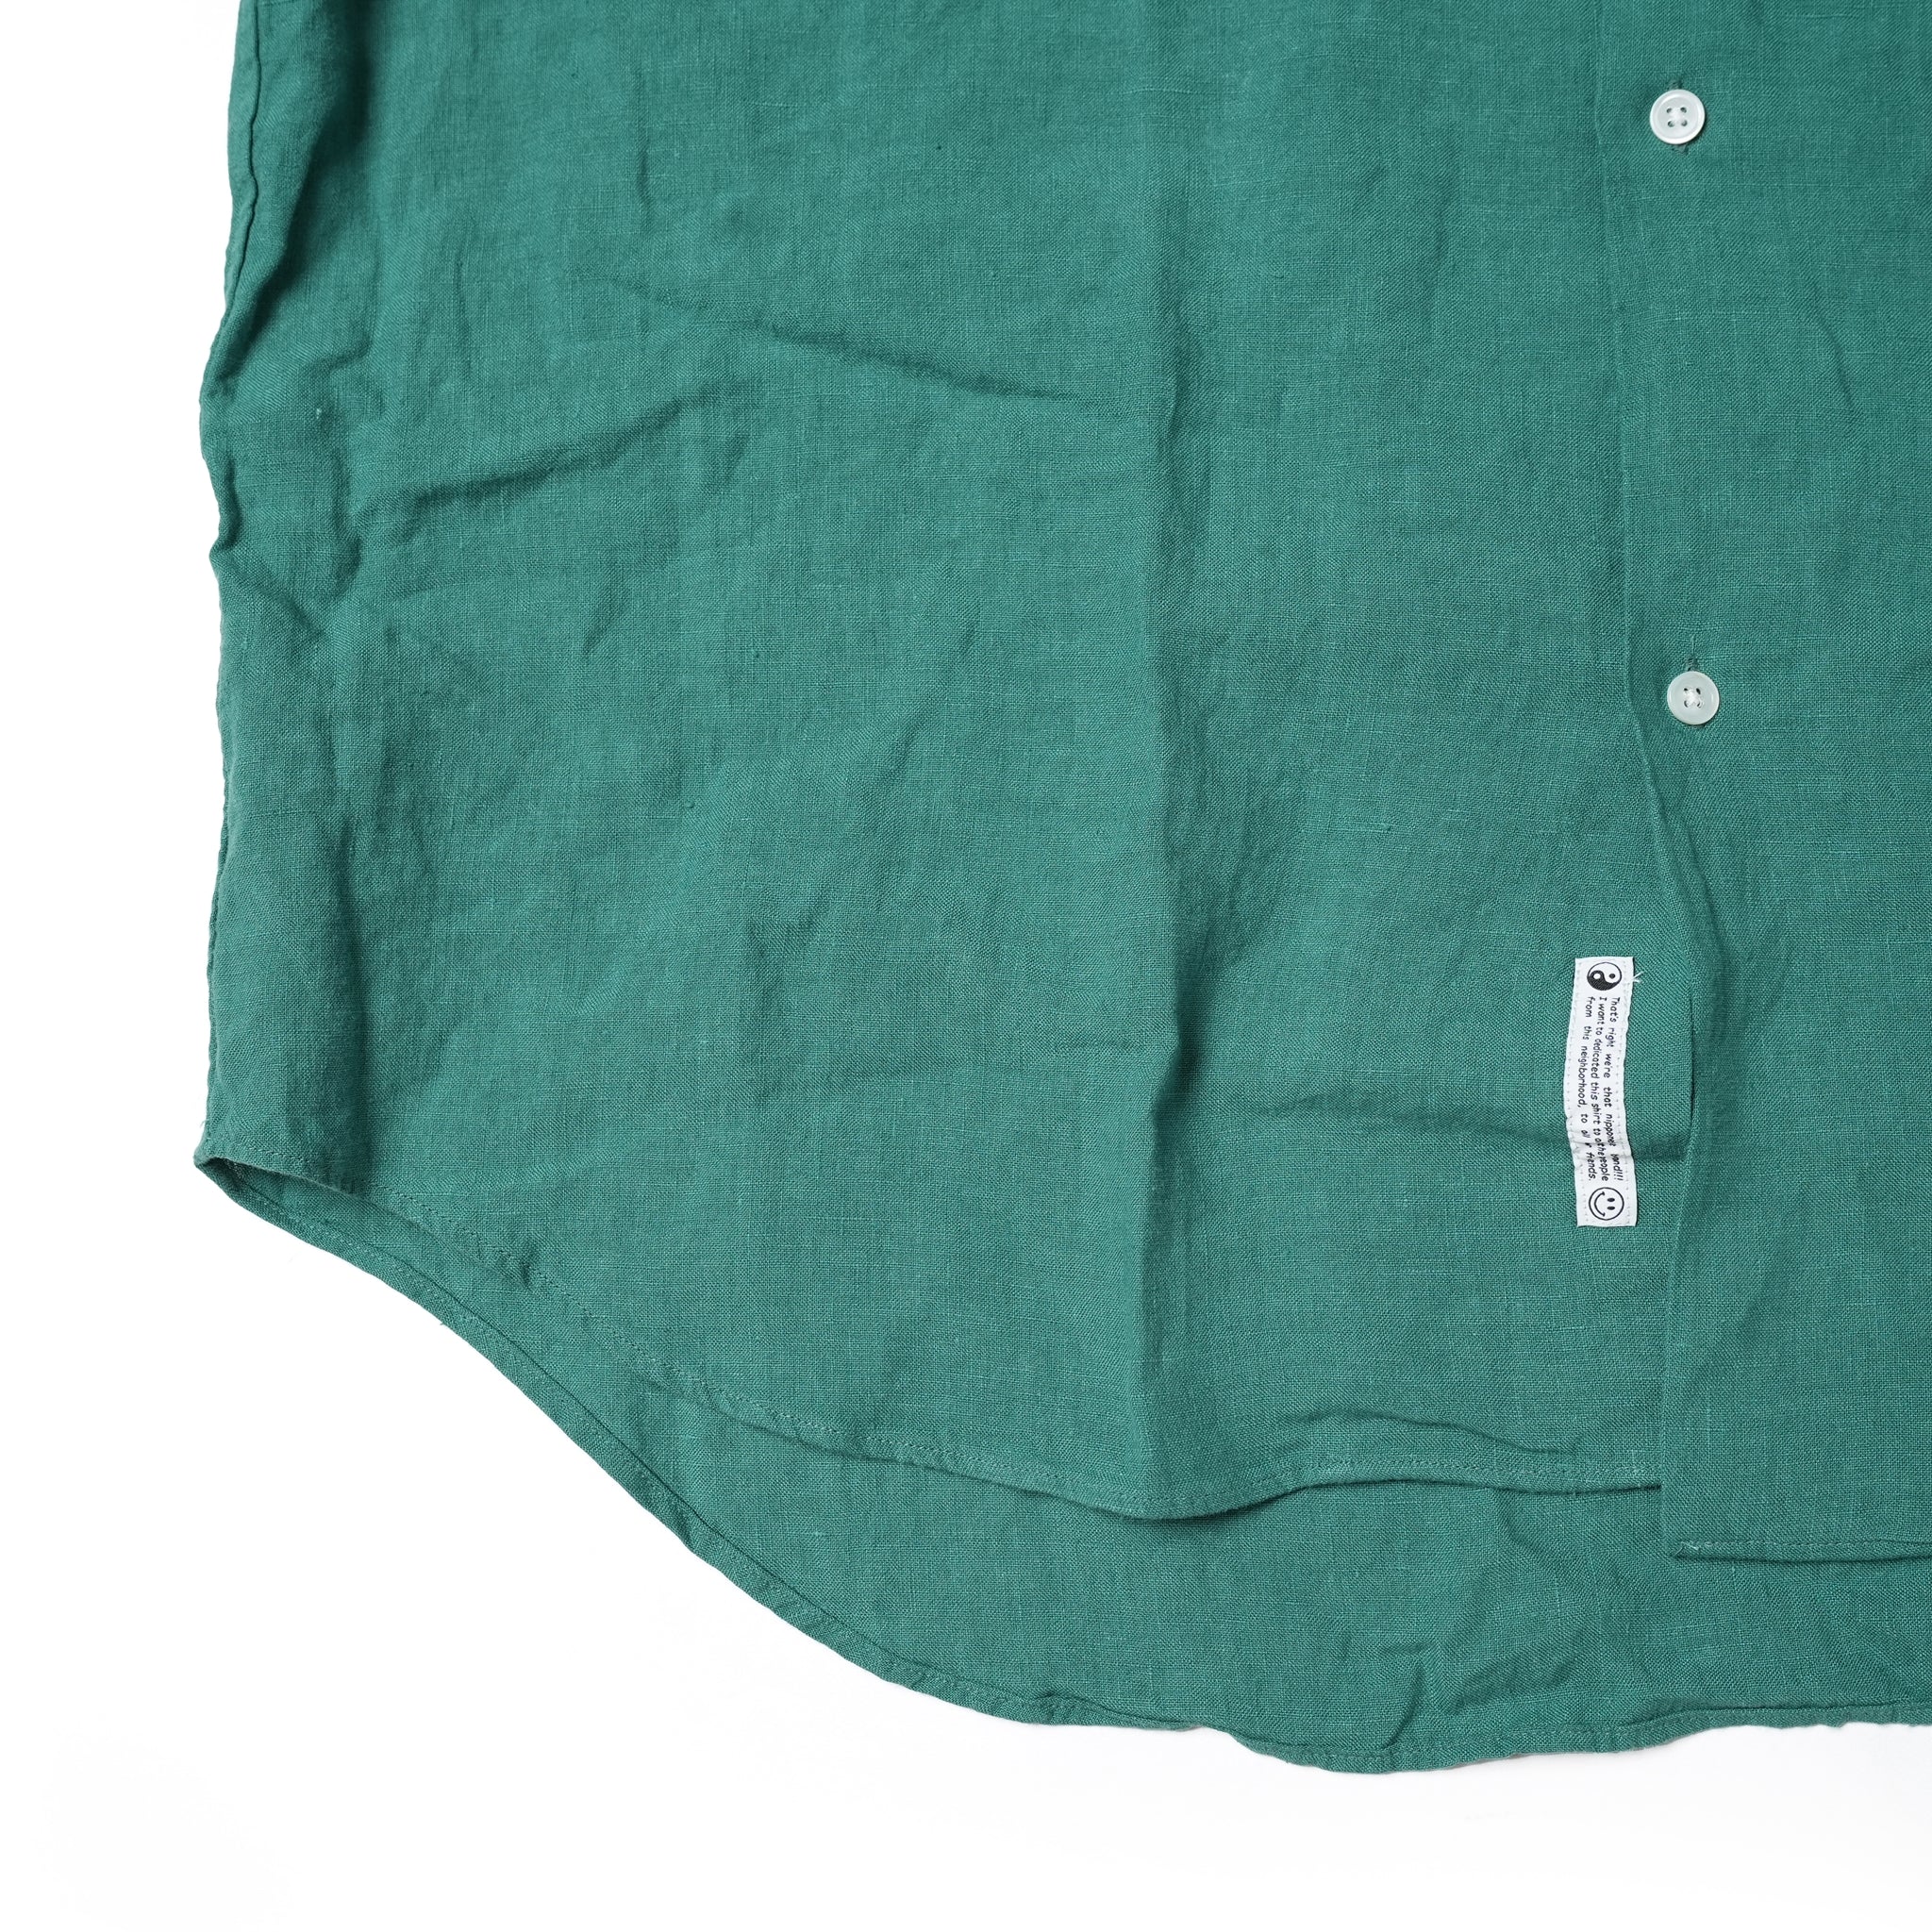 Name: FLAT COLLAR SS SHIRT *GREEN LINEN 【CITYLIGHTS PRODUCTS_シティライツプロダクツ】